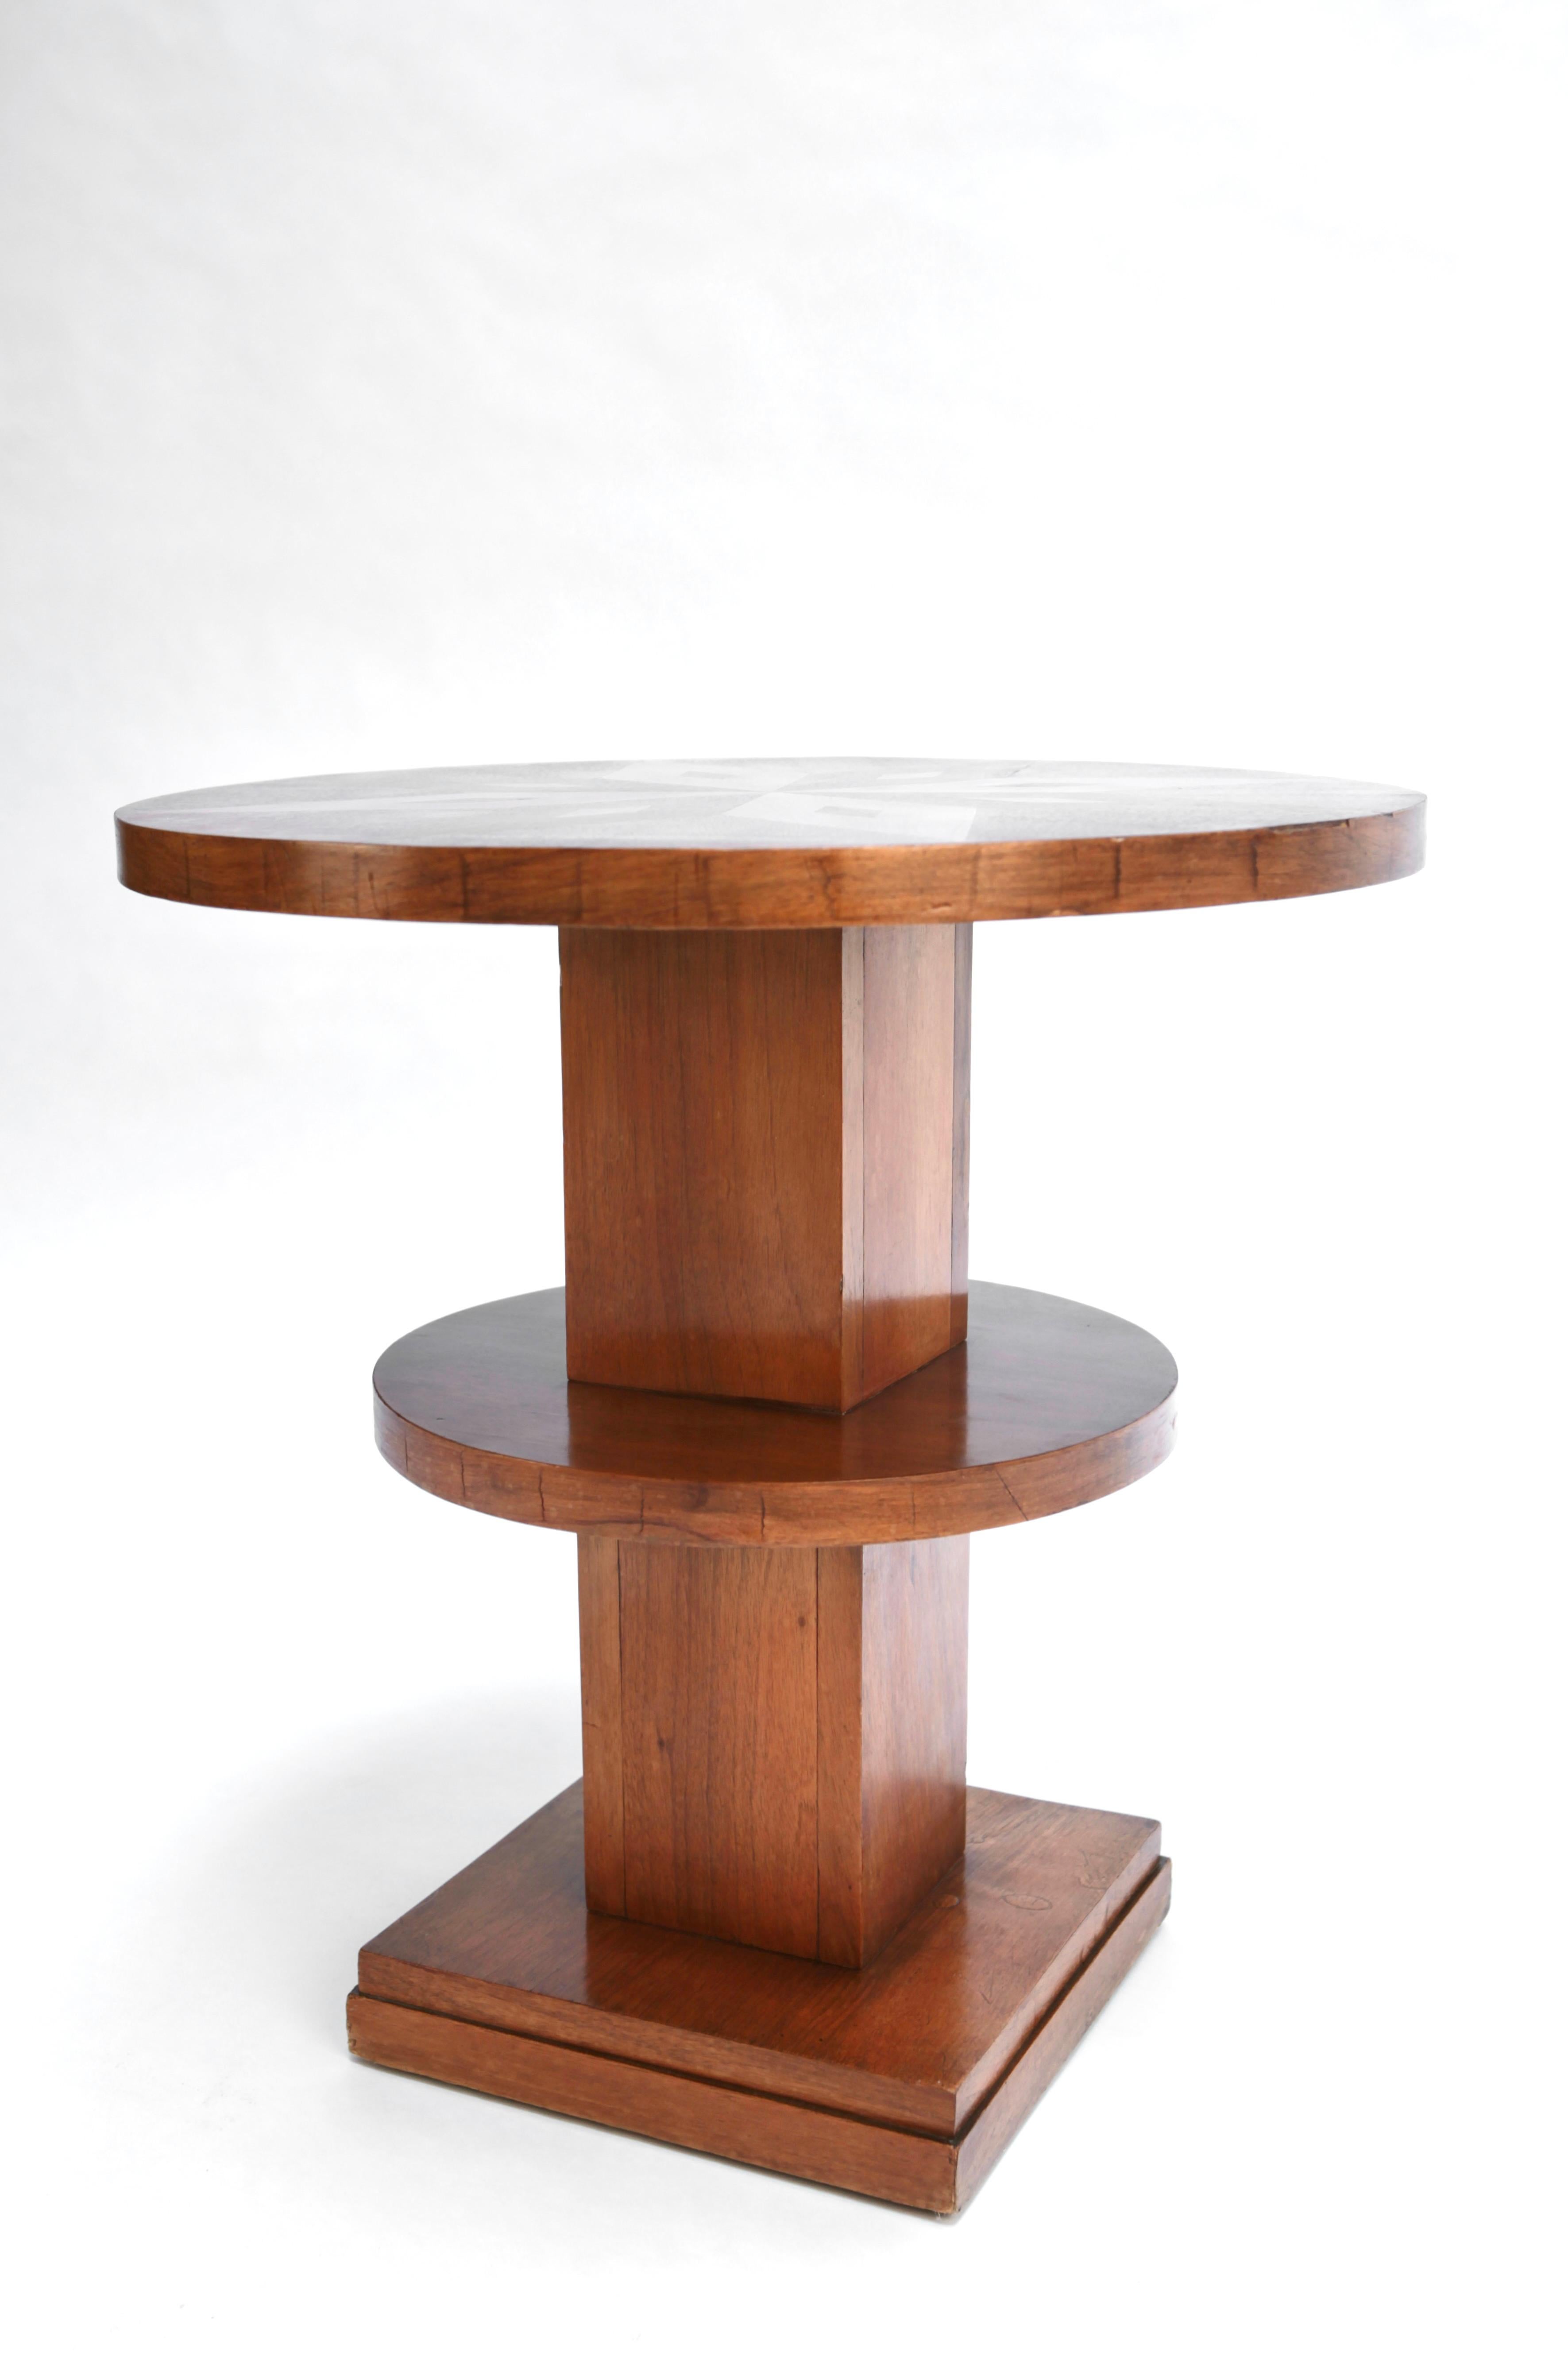 A French Art Deco Side Table, Wood Inlayed & Veneer, France 1930s For Sale 4